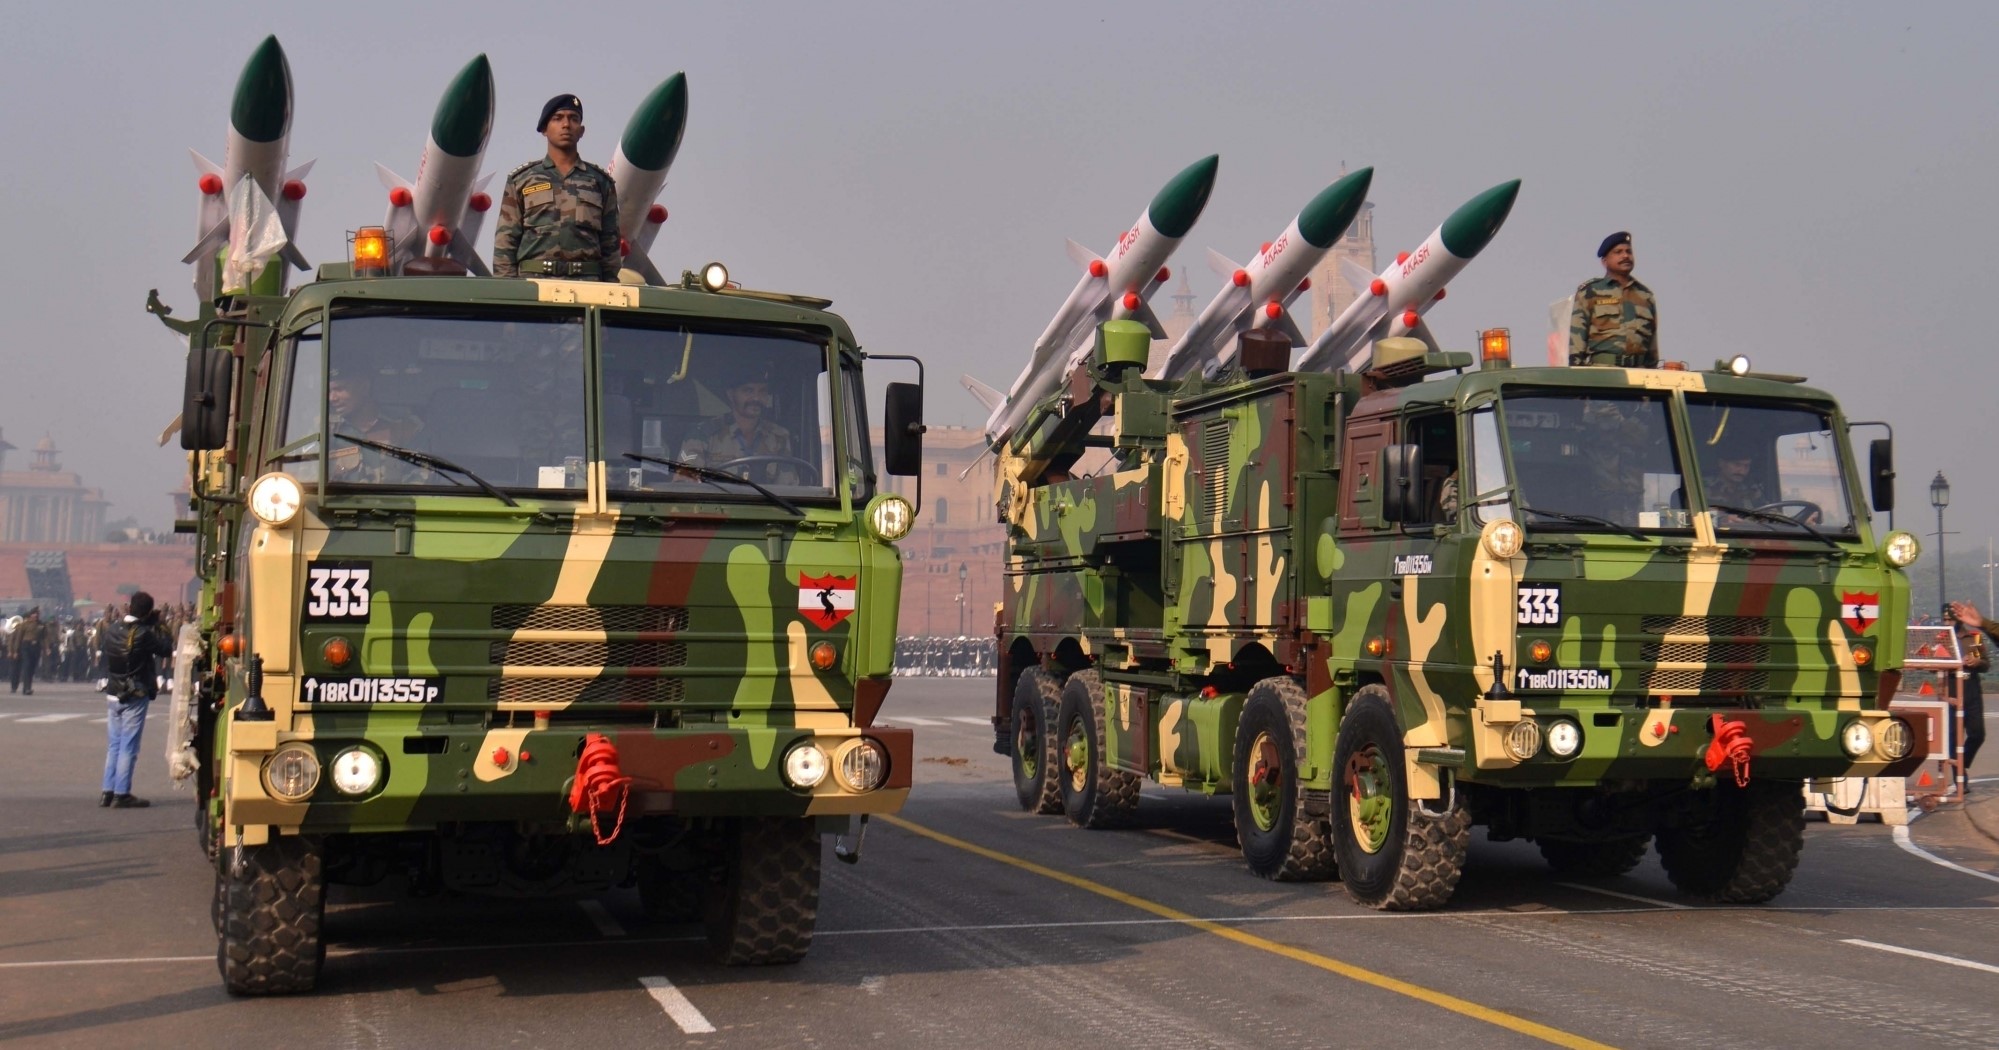 Where does India-Pakistan stands in terms of military strength